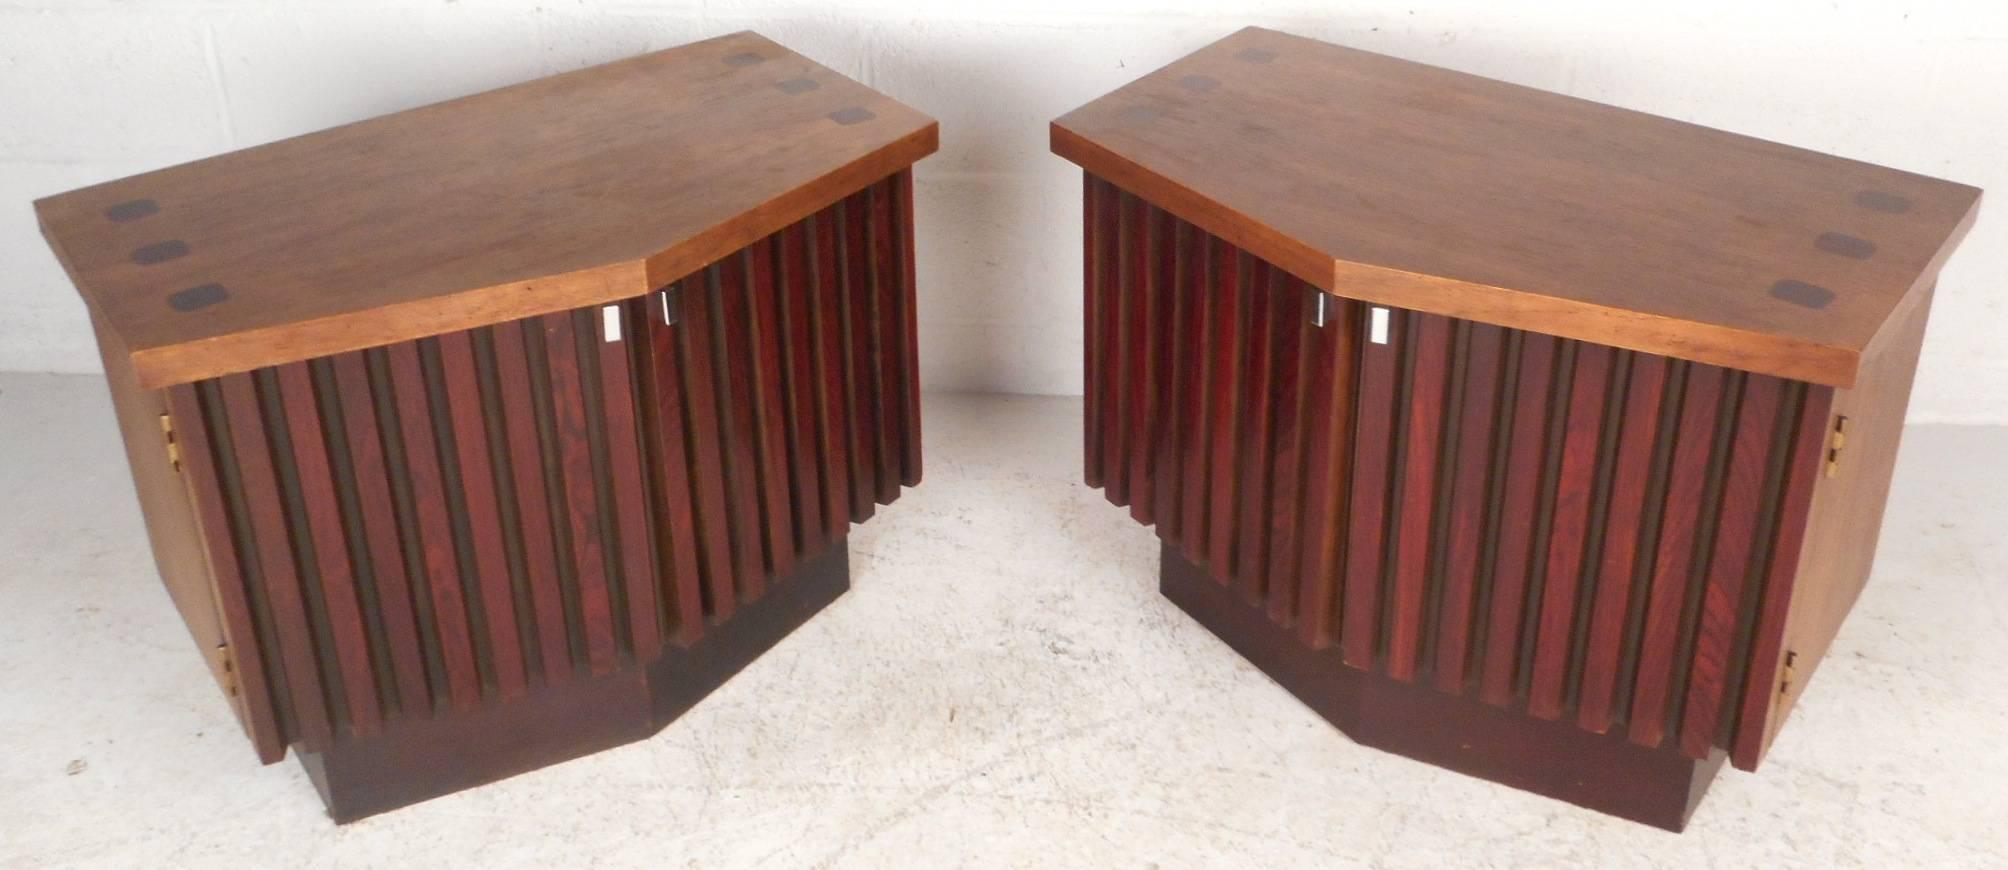 This beautiful pair of vintage modern nightstands are made of walnut with unique rosewood fronts. Unique shapely design with chrome pulls on each cabinet door. Stylish pair of end tables with plenty of space to store items and a large top to place